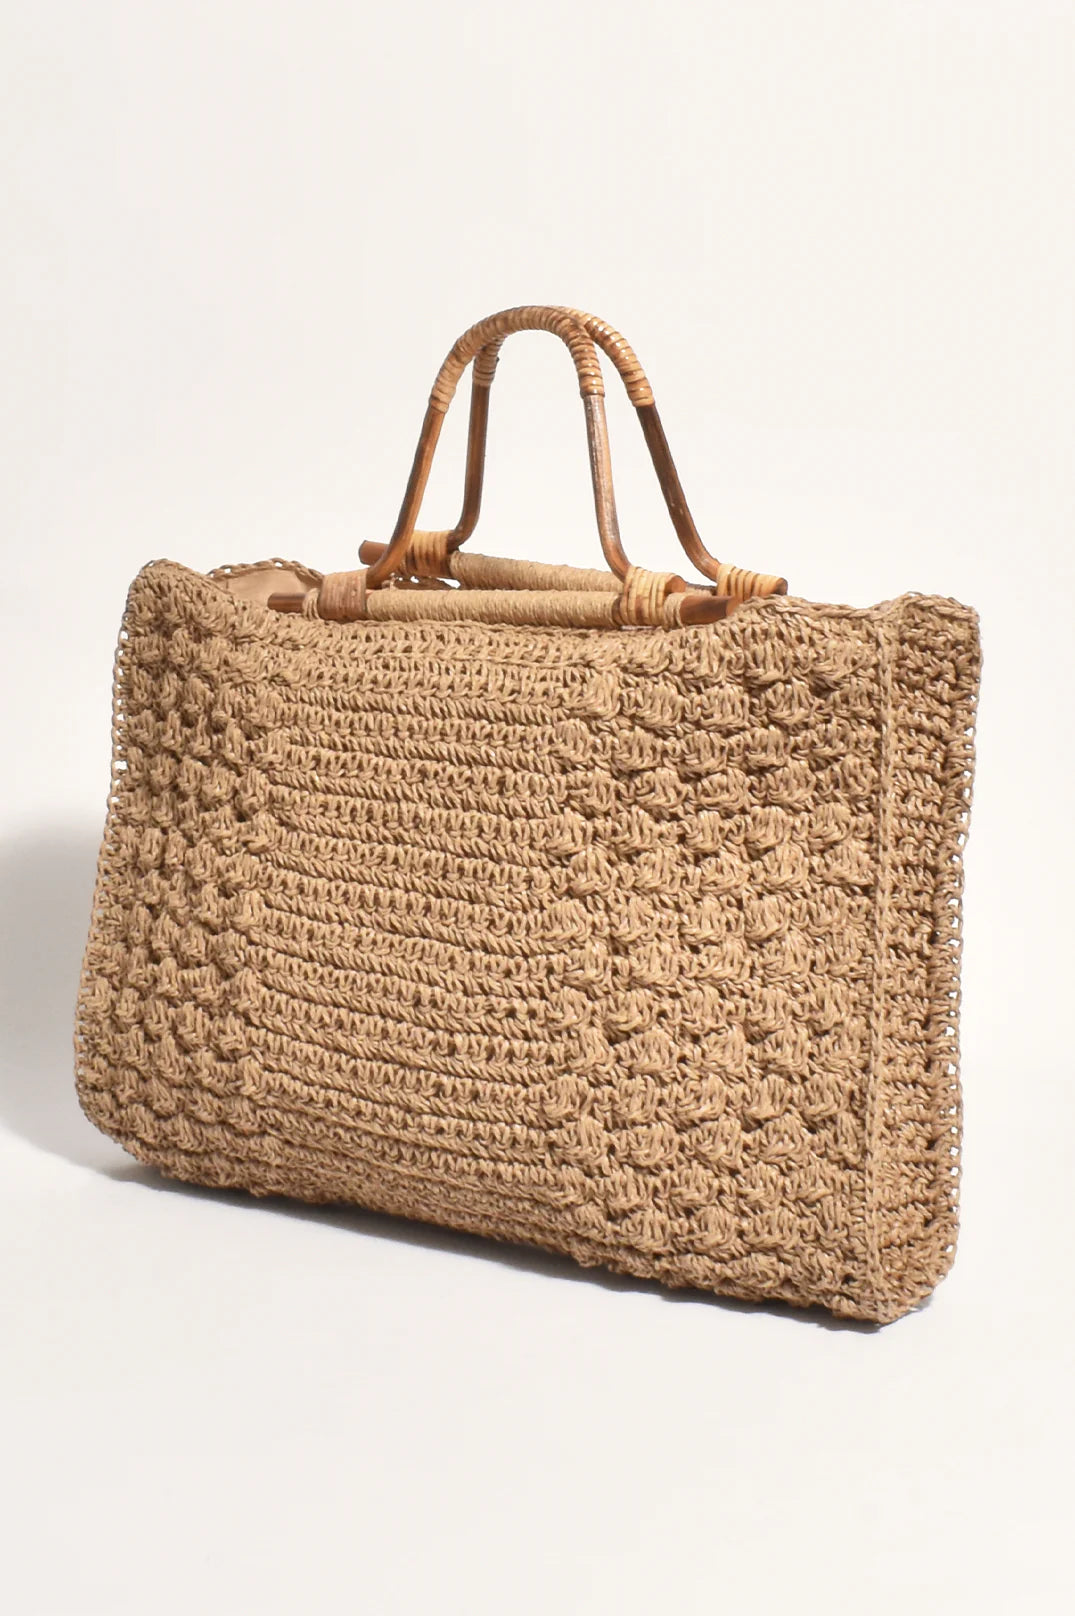 Woven Bamboo Tote - Camel